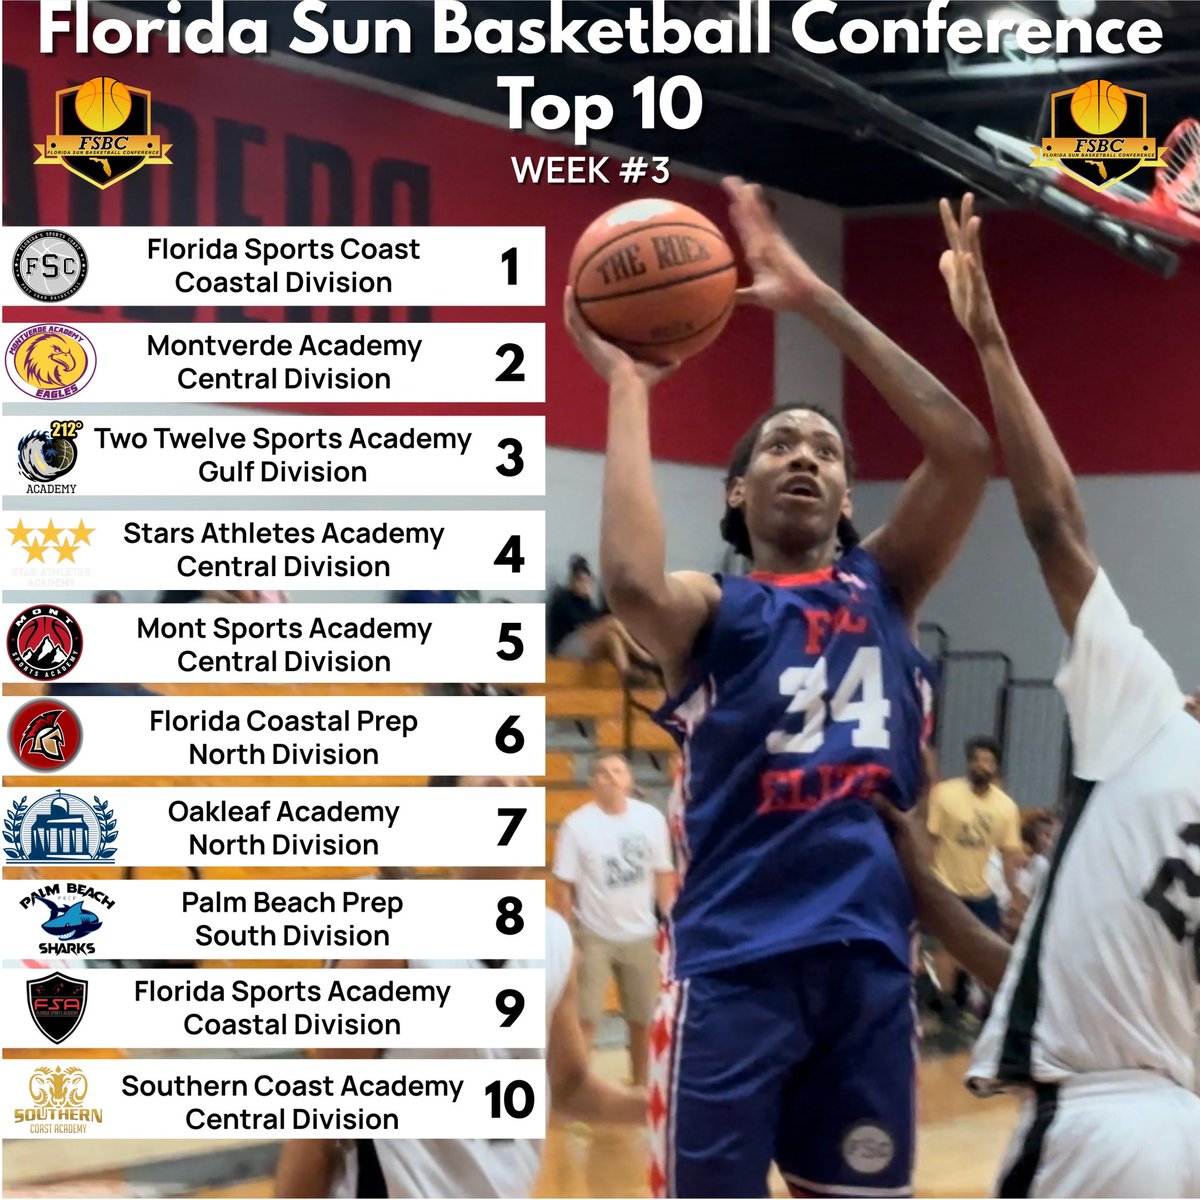 The Week 3 (November 12) Florida Sun Basketball Conference rankings have been released. Florida Sports Coast is the new #1 ranked team, while Montverde moved up to #2. Southern Coast Academy is the new team in the FSBC top 10.